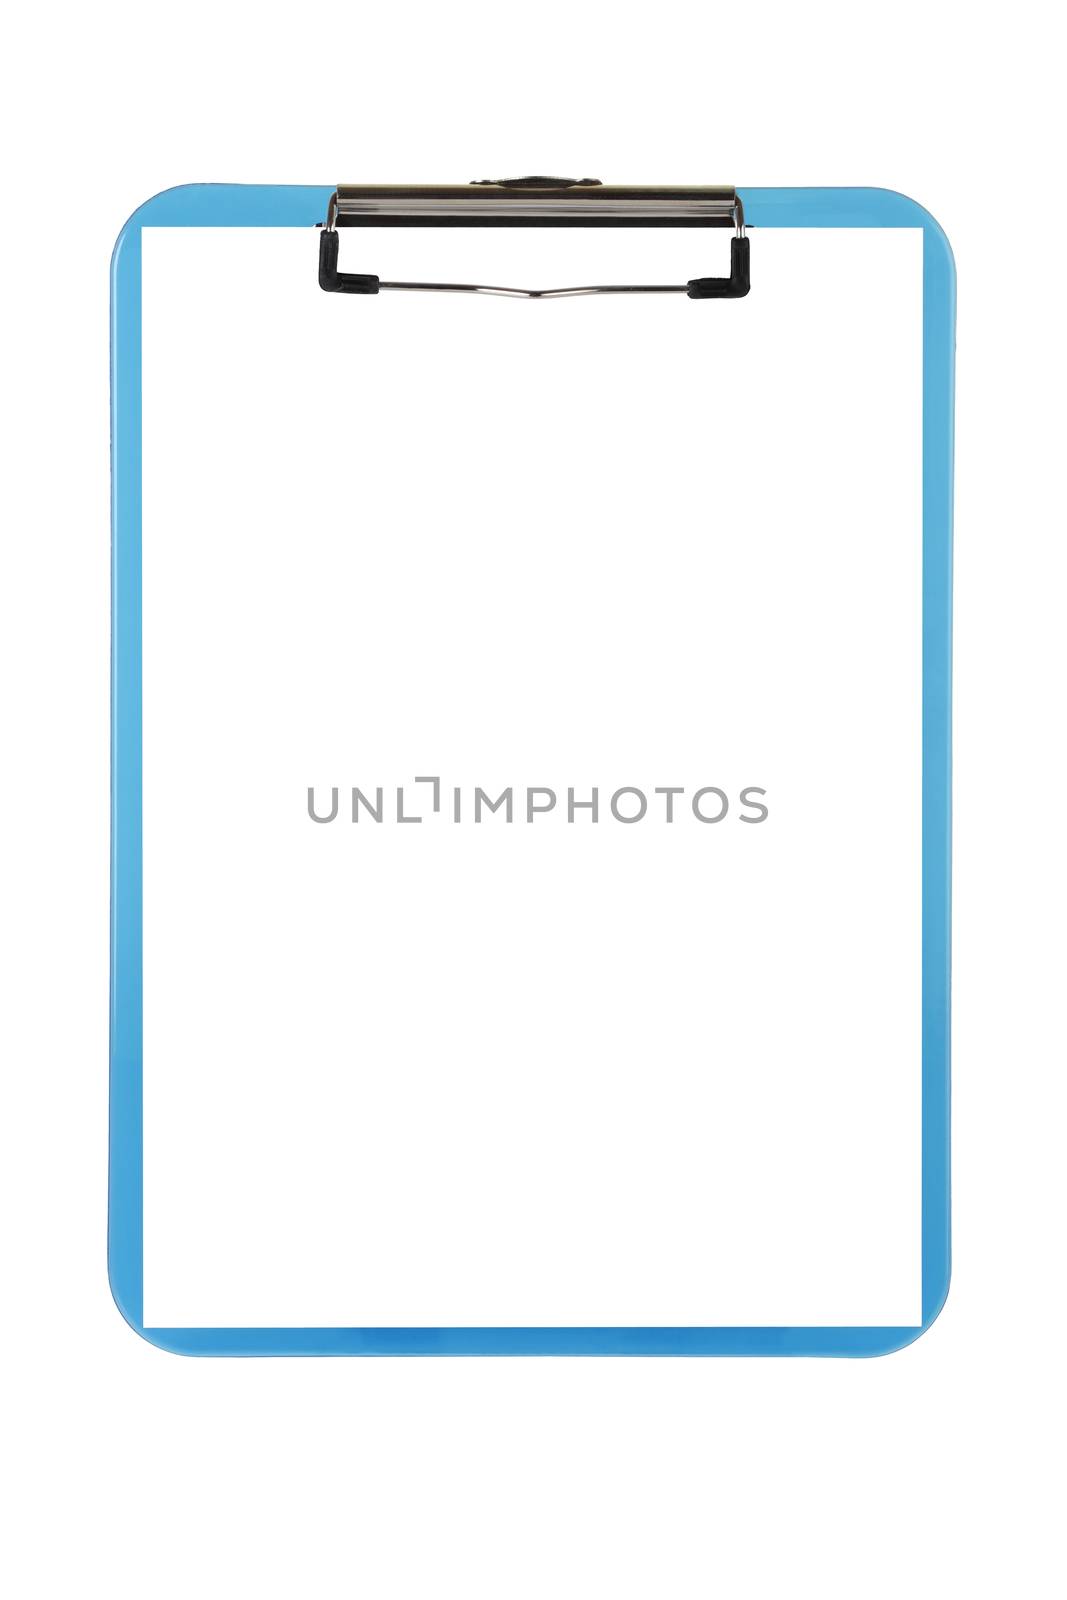 A blue clipboard isolated on white with clipping path and copy space